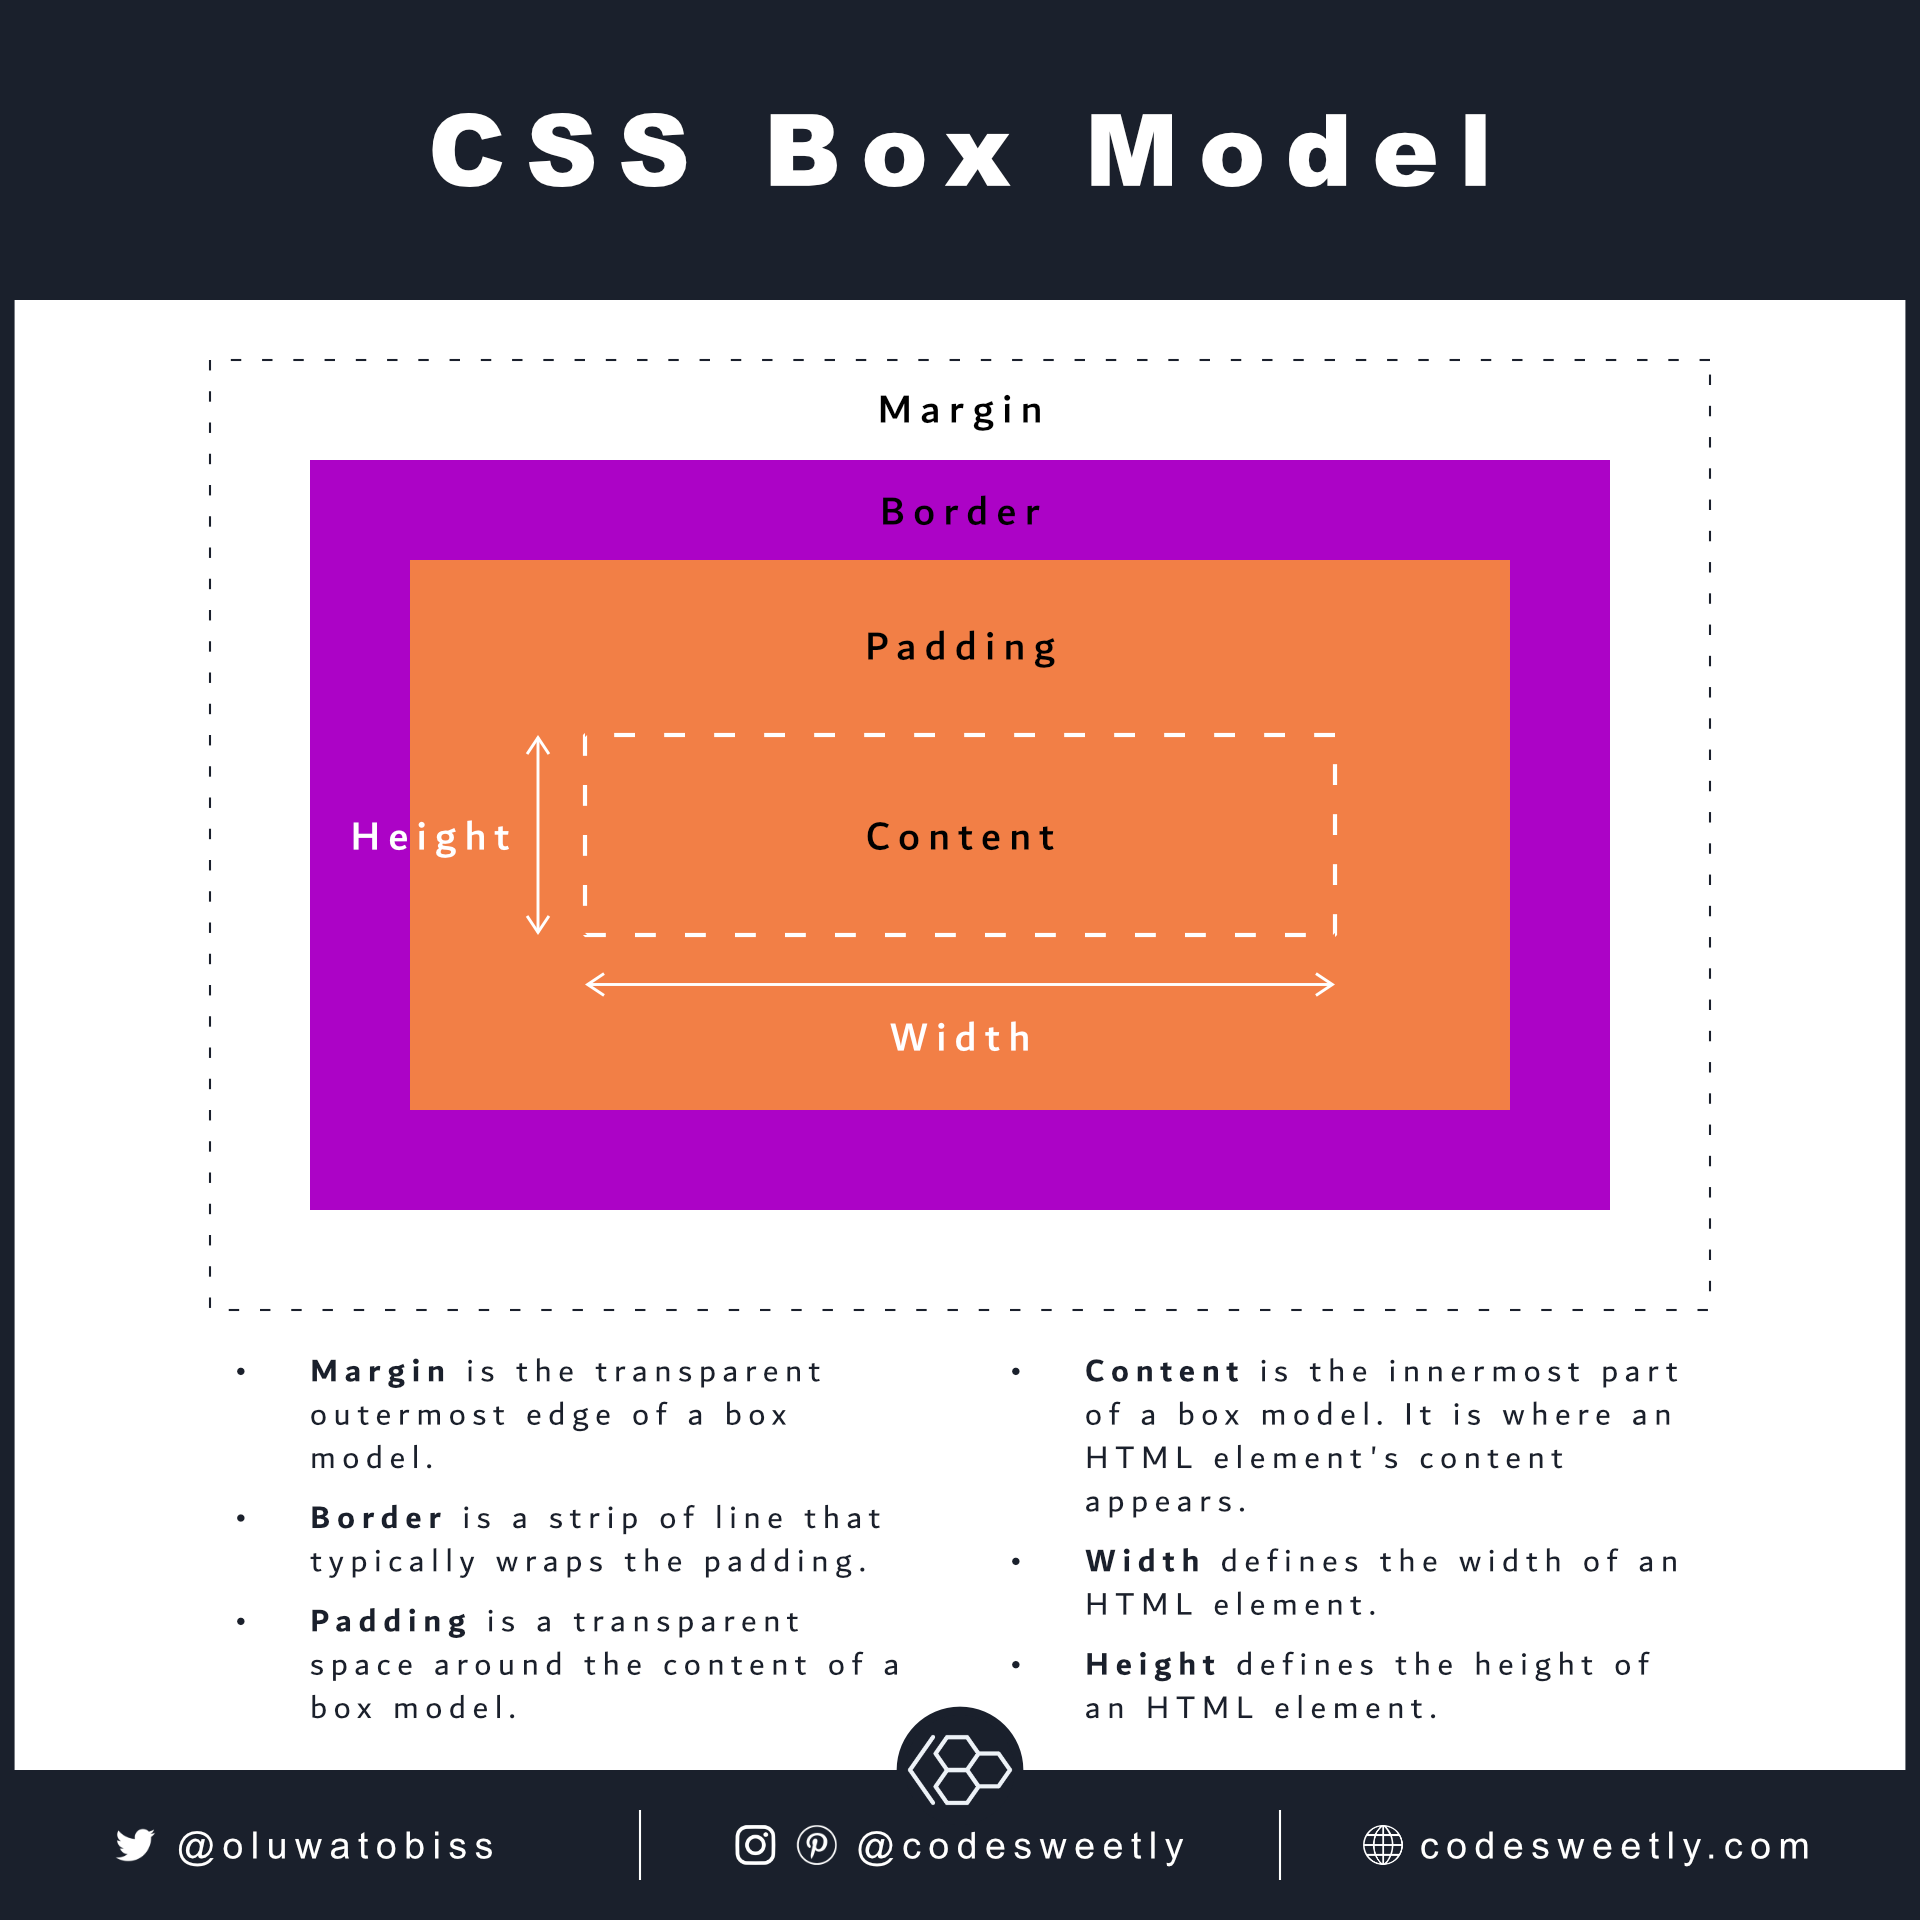 What Is The CSS Box Model? - Scaler Topics